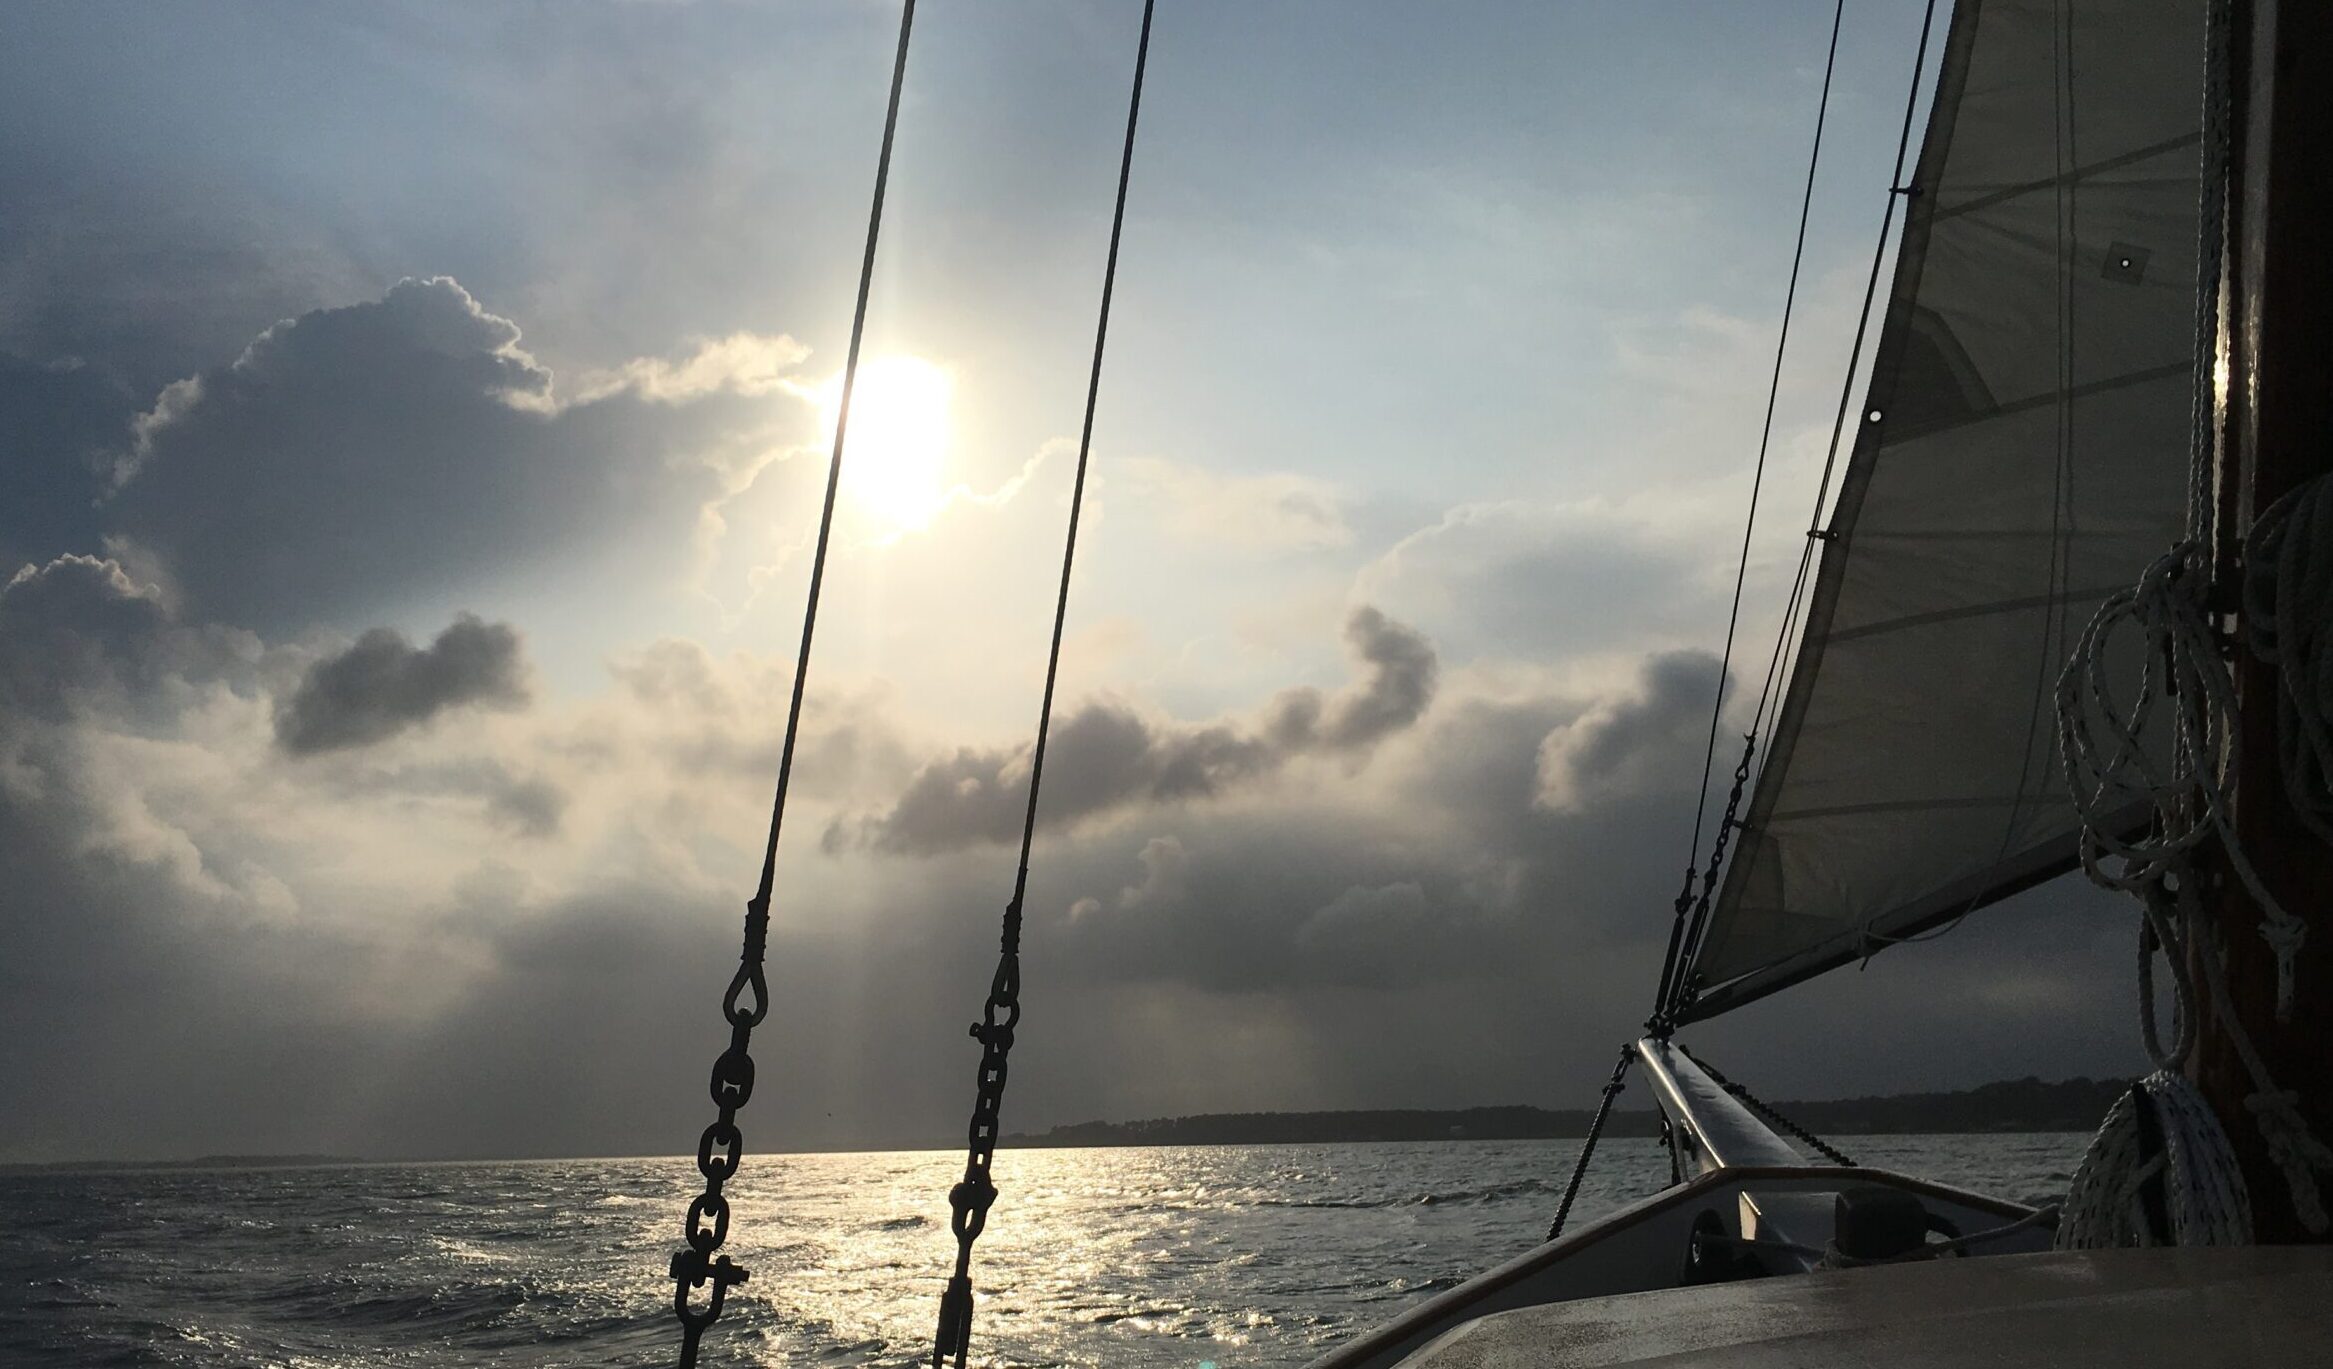 image: bow of a sailboat heads towards a cloudy horizon.